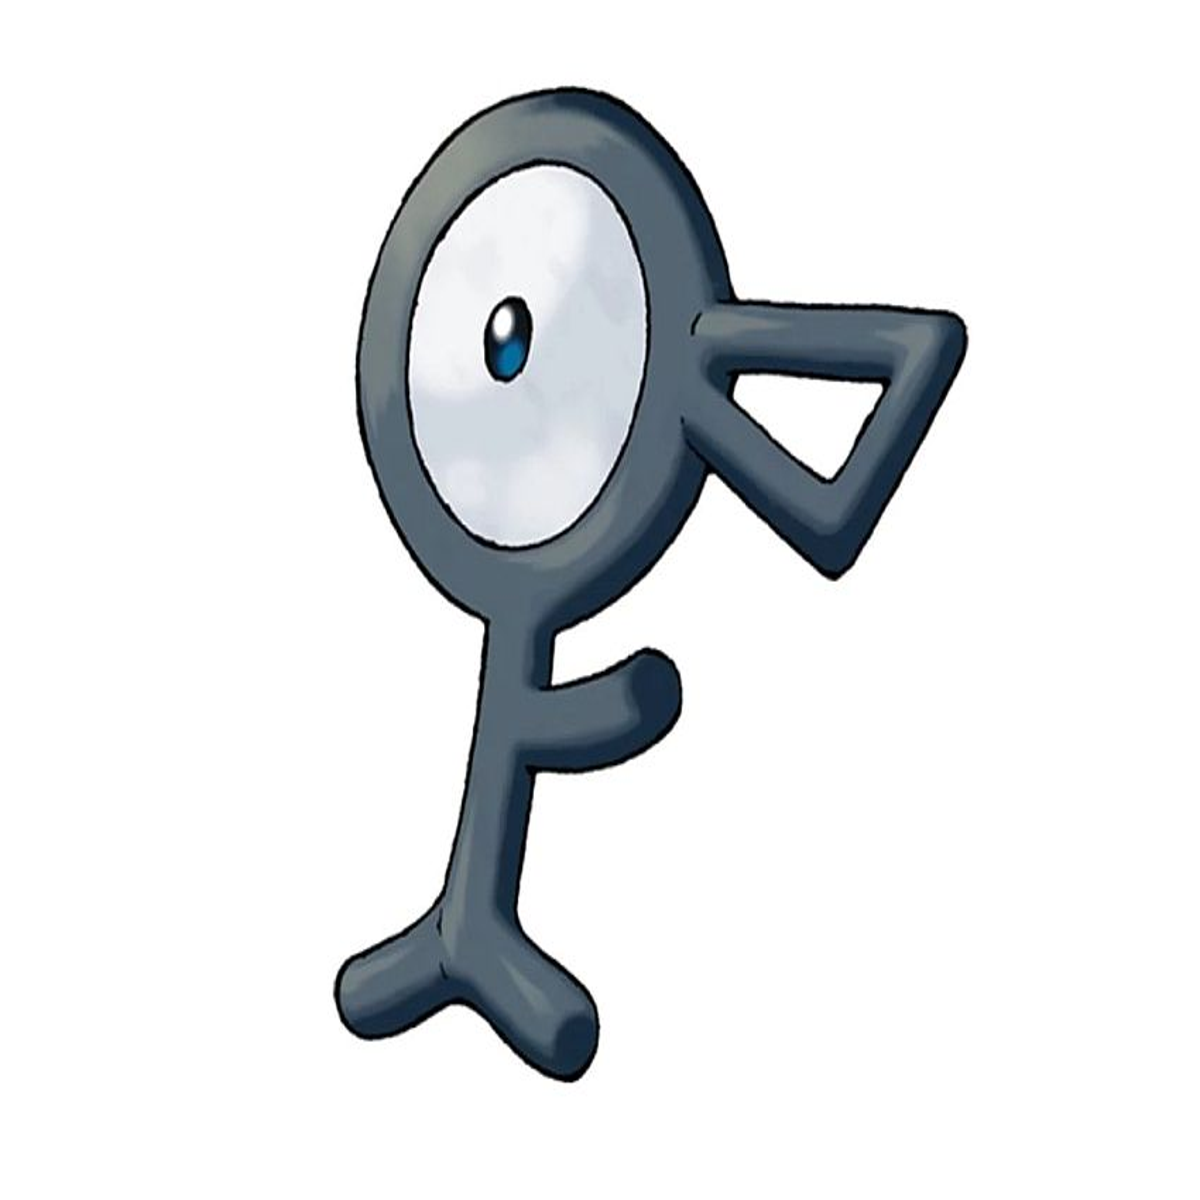 Pokemon Go dataminers find code for gen-two Pokemon Unown, 38 moves, five  new evolution items